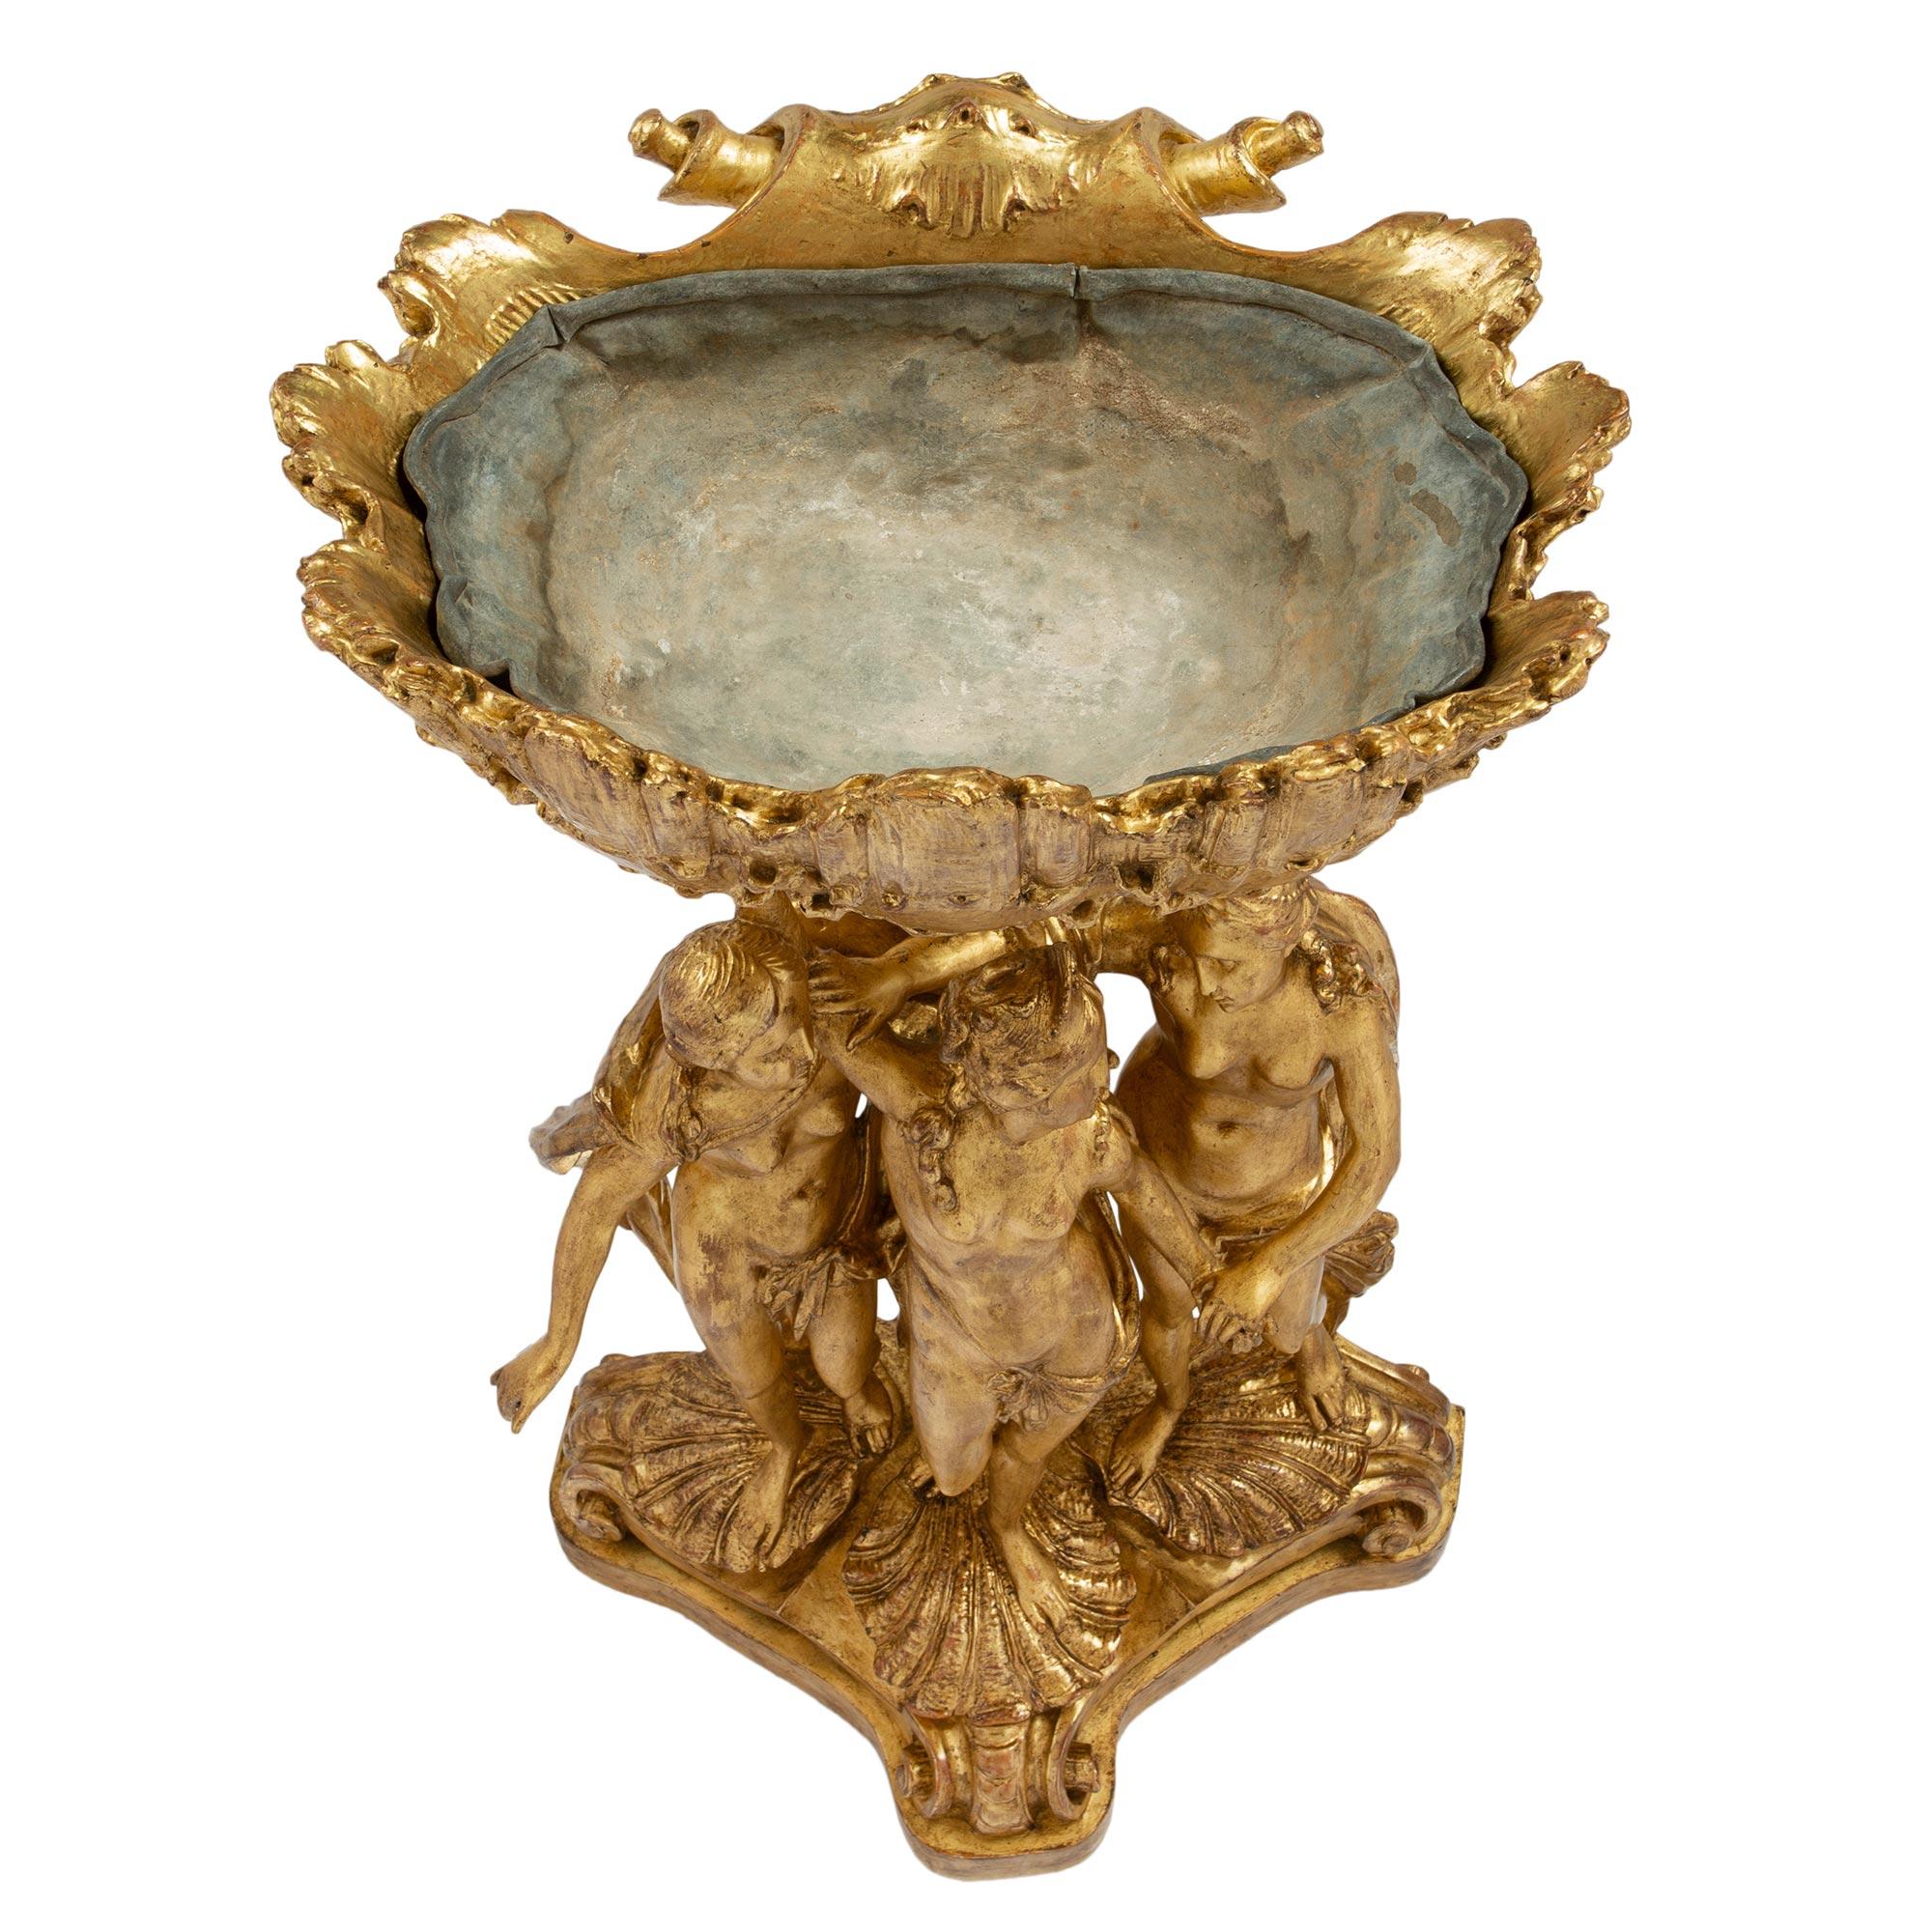 Italian 18th Century Louis XVI Period Giltwood Three Graces Planter In Good Condition For Sale In West Palm Beach, FL